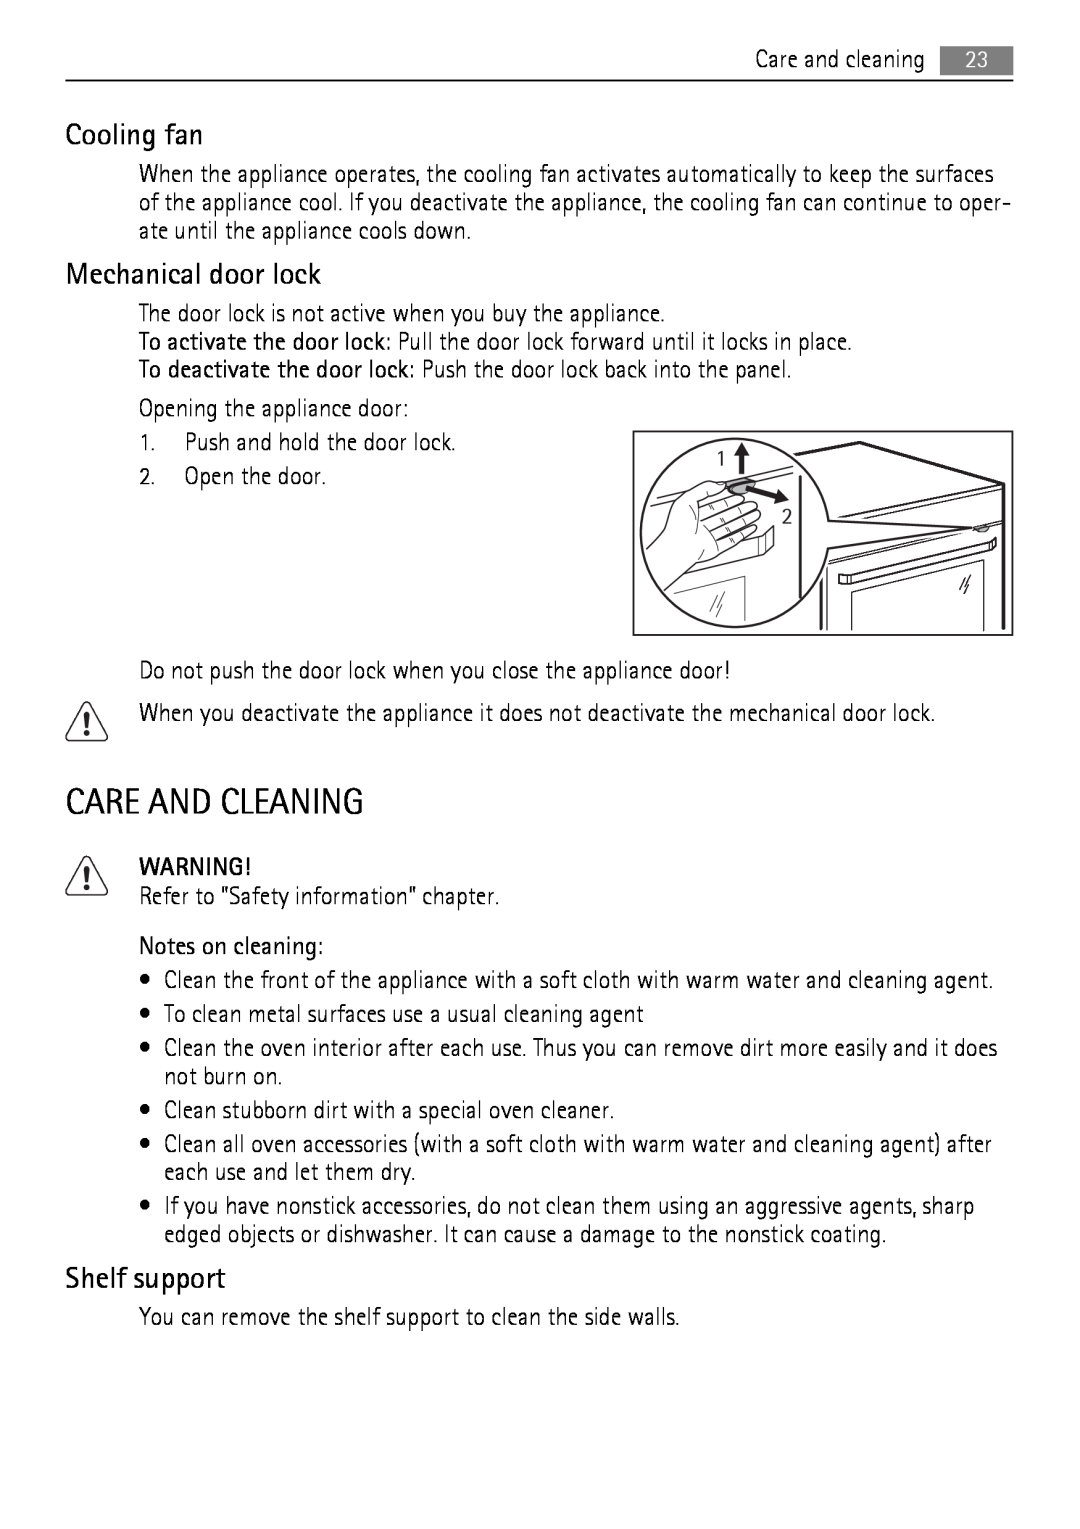 AEG BE7314401 user manual Care And Cleaning, Cooling fan, Mechanical door lock, Shelf support 